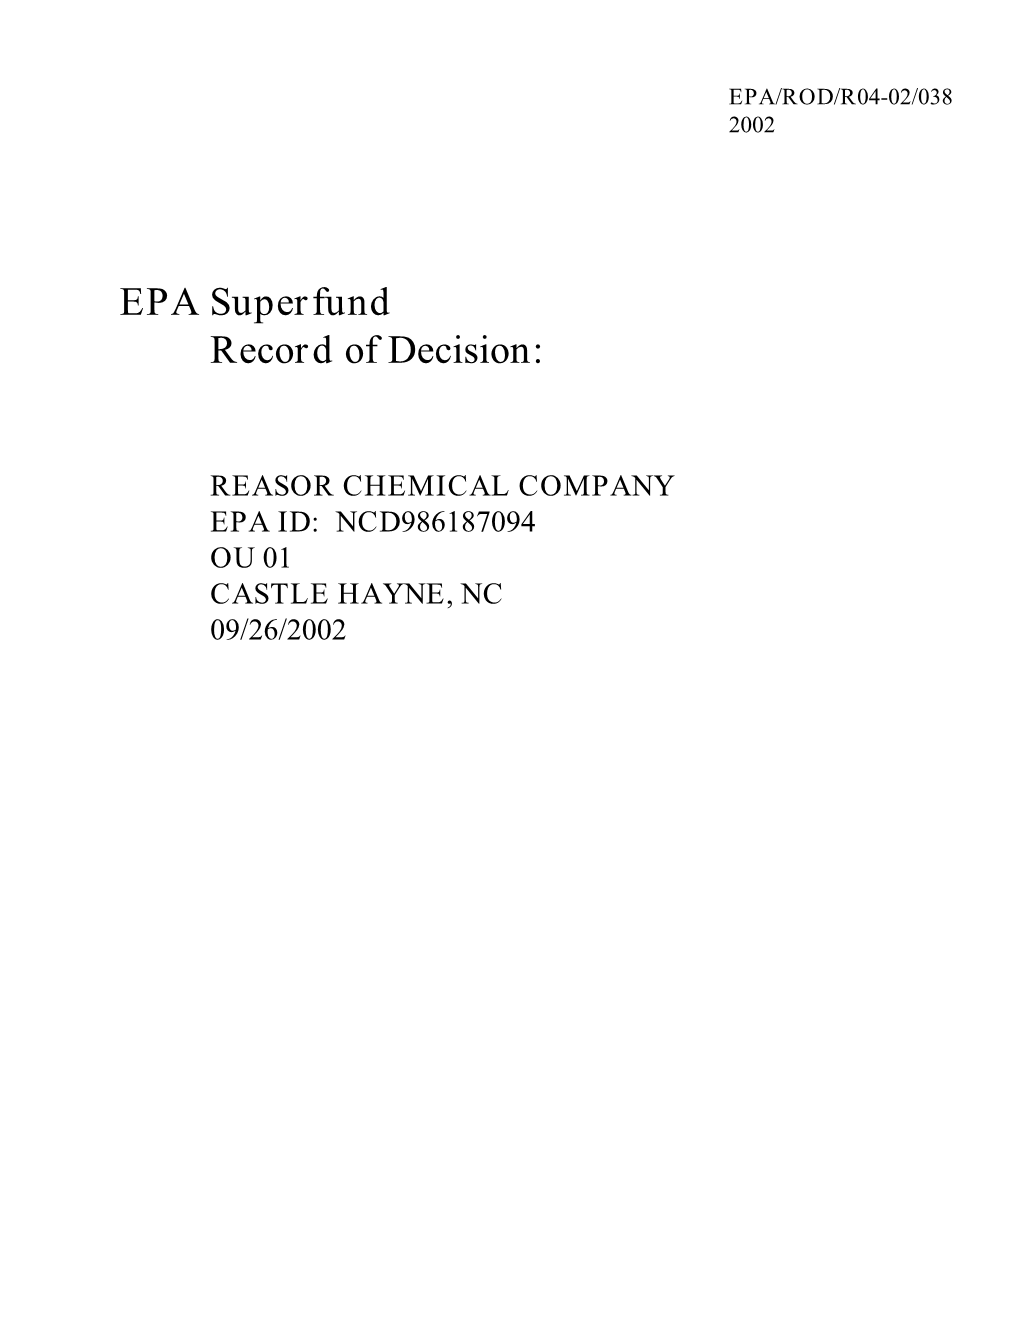 Reasor Chemical Company Epa Id: Ncd986187094 Ou 01 Castle Hayne, Nc 09/26/2002 Record of Decision Summary of Remedial Alternative Selection